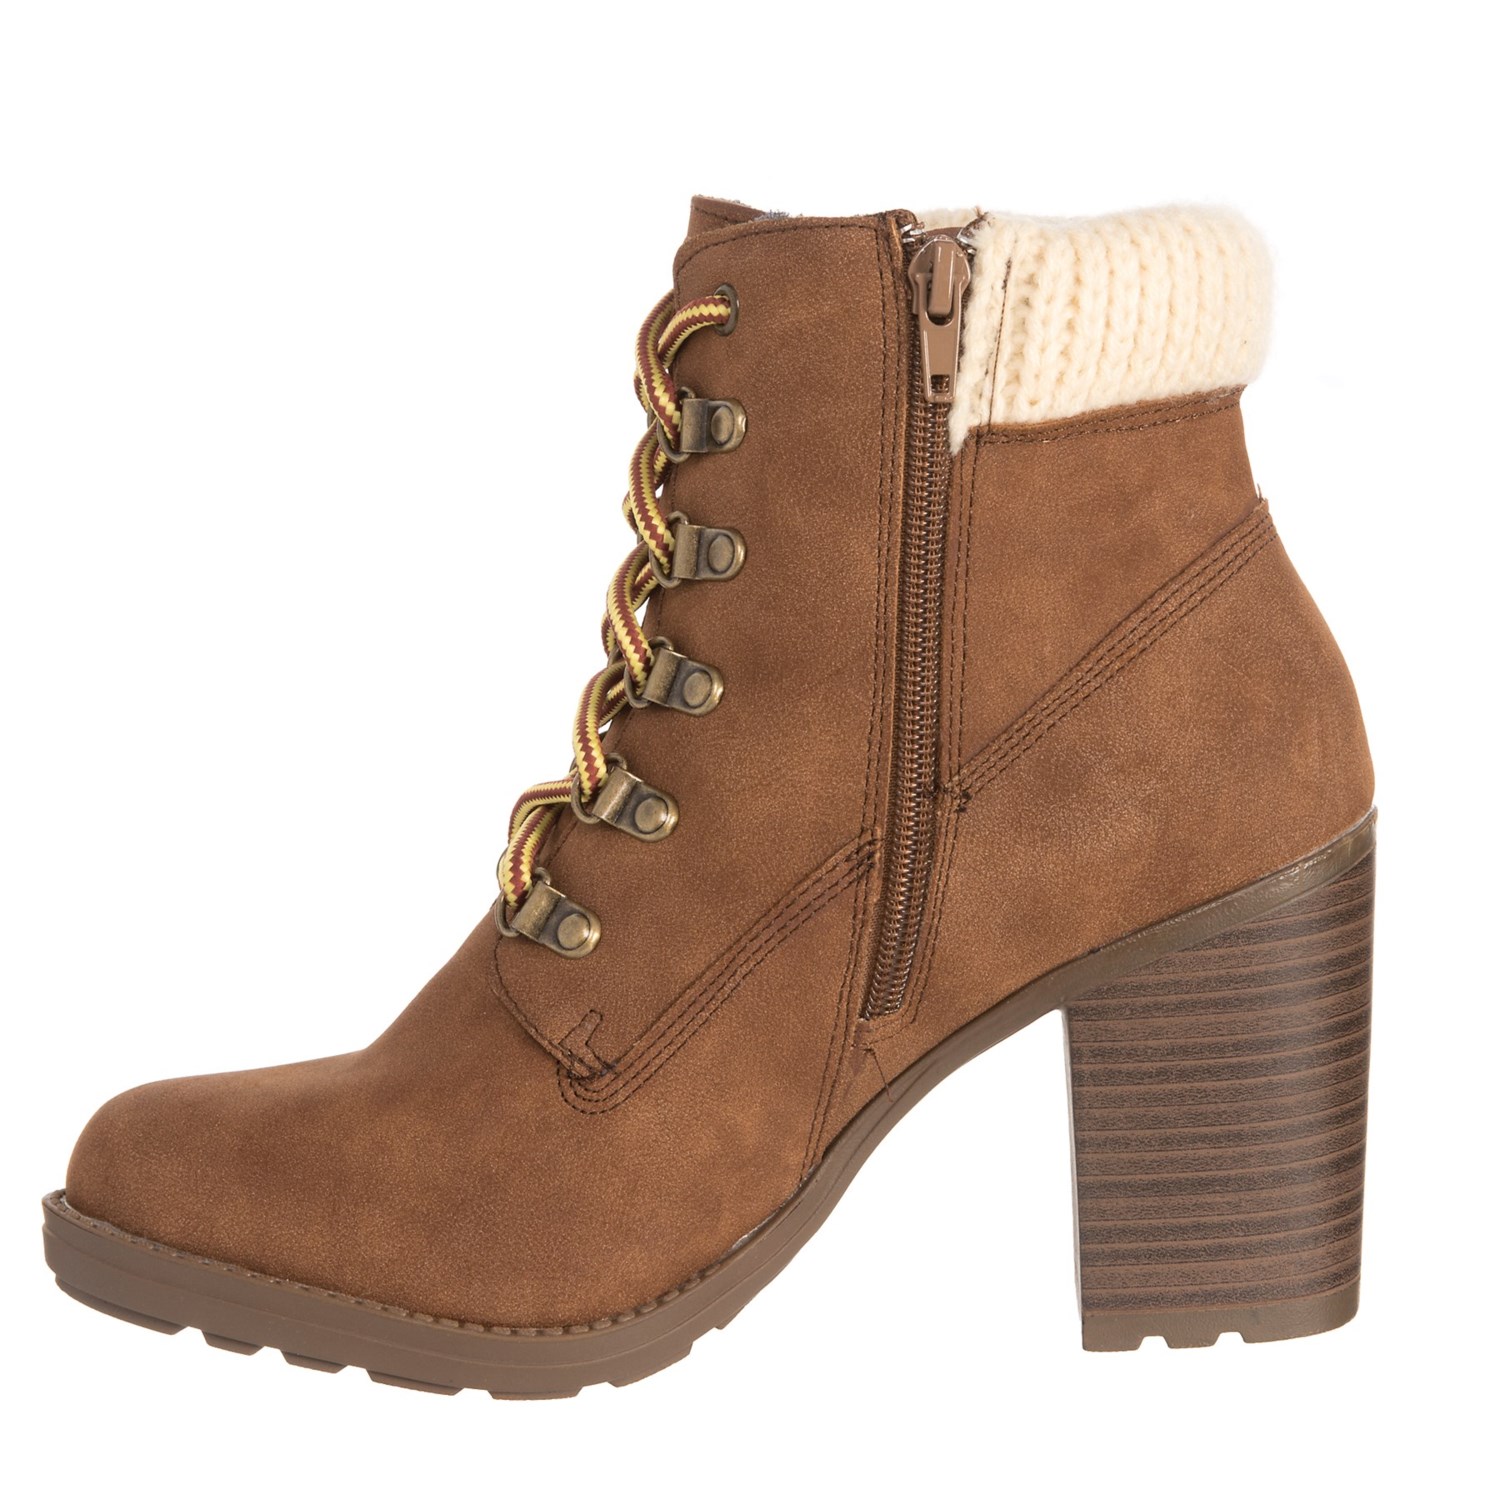 ESPRIT Hero Ankle Boots (For Women) - Save 56%